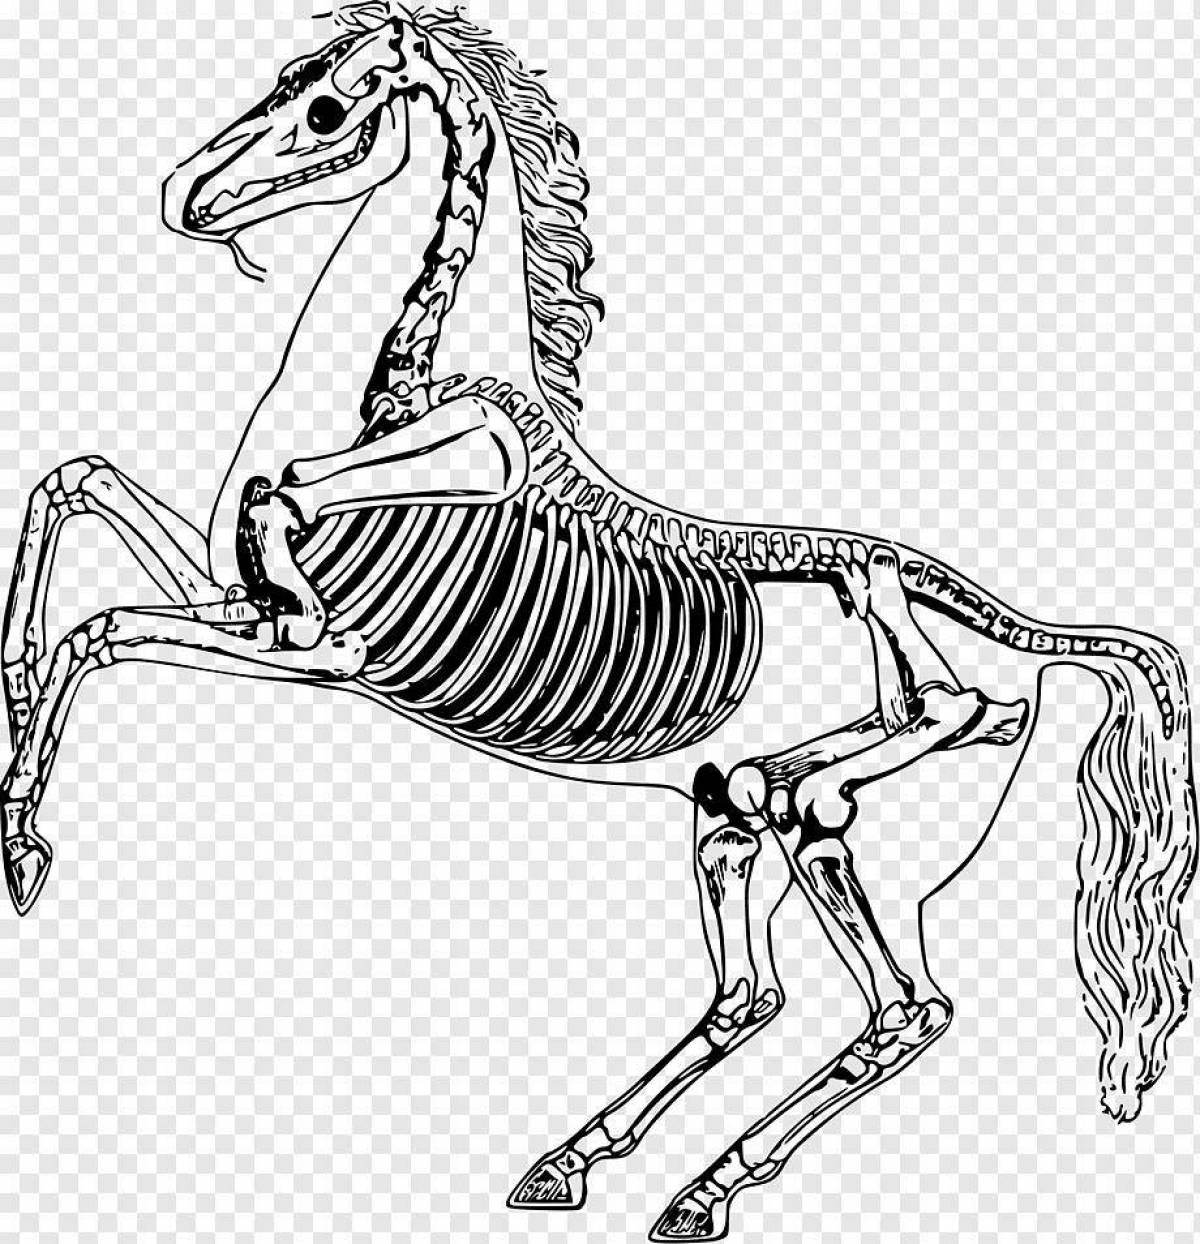 Animated lanky horse coloring page